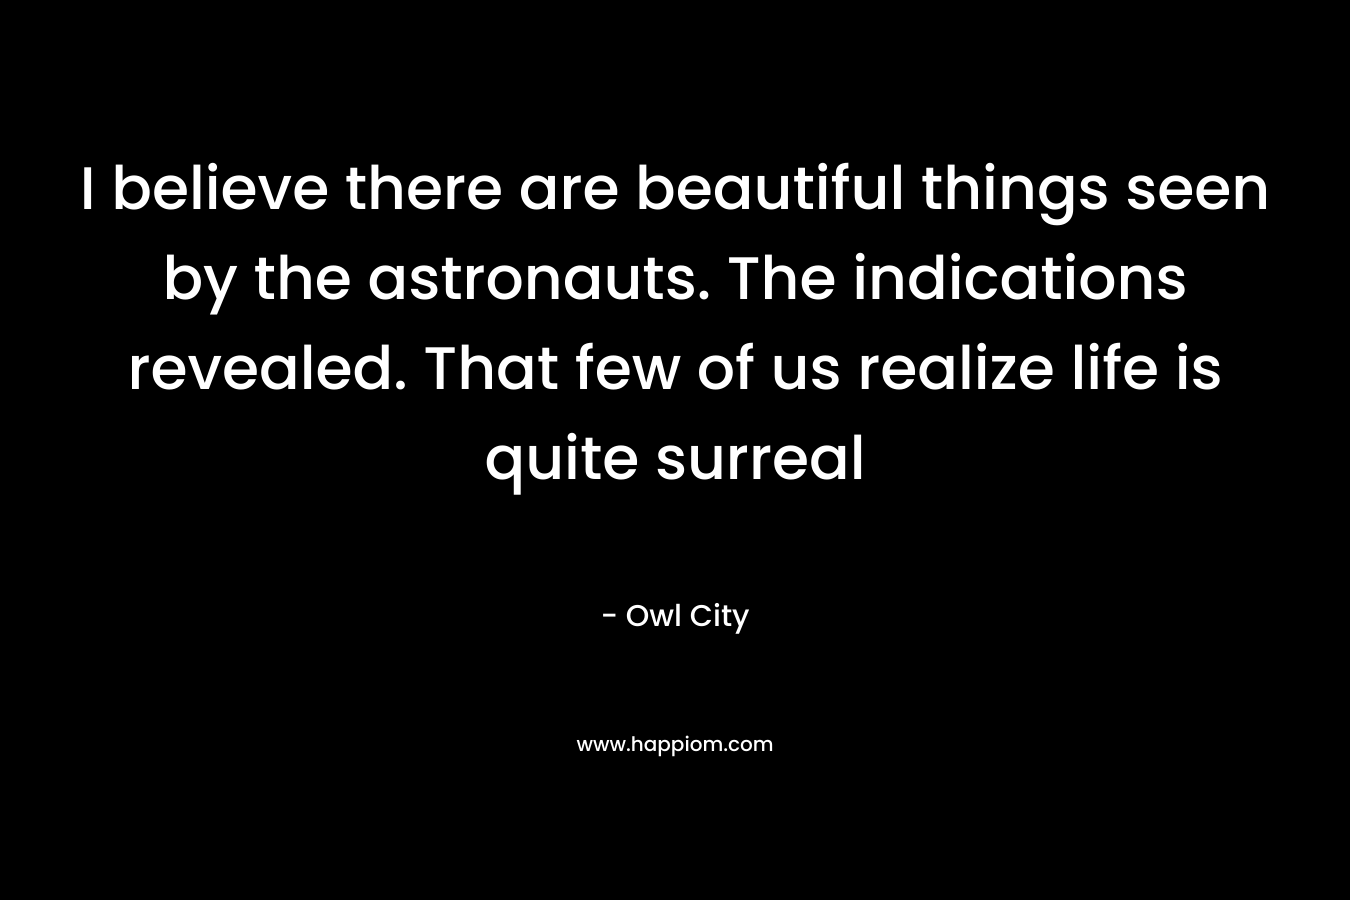 I believe there are beautiful things seen by the astronauts. The indications revealed. That few of us realize life is quite surreal – Owl City